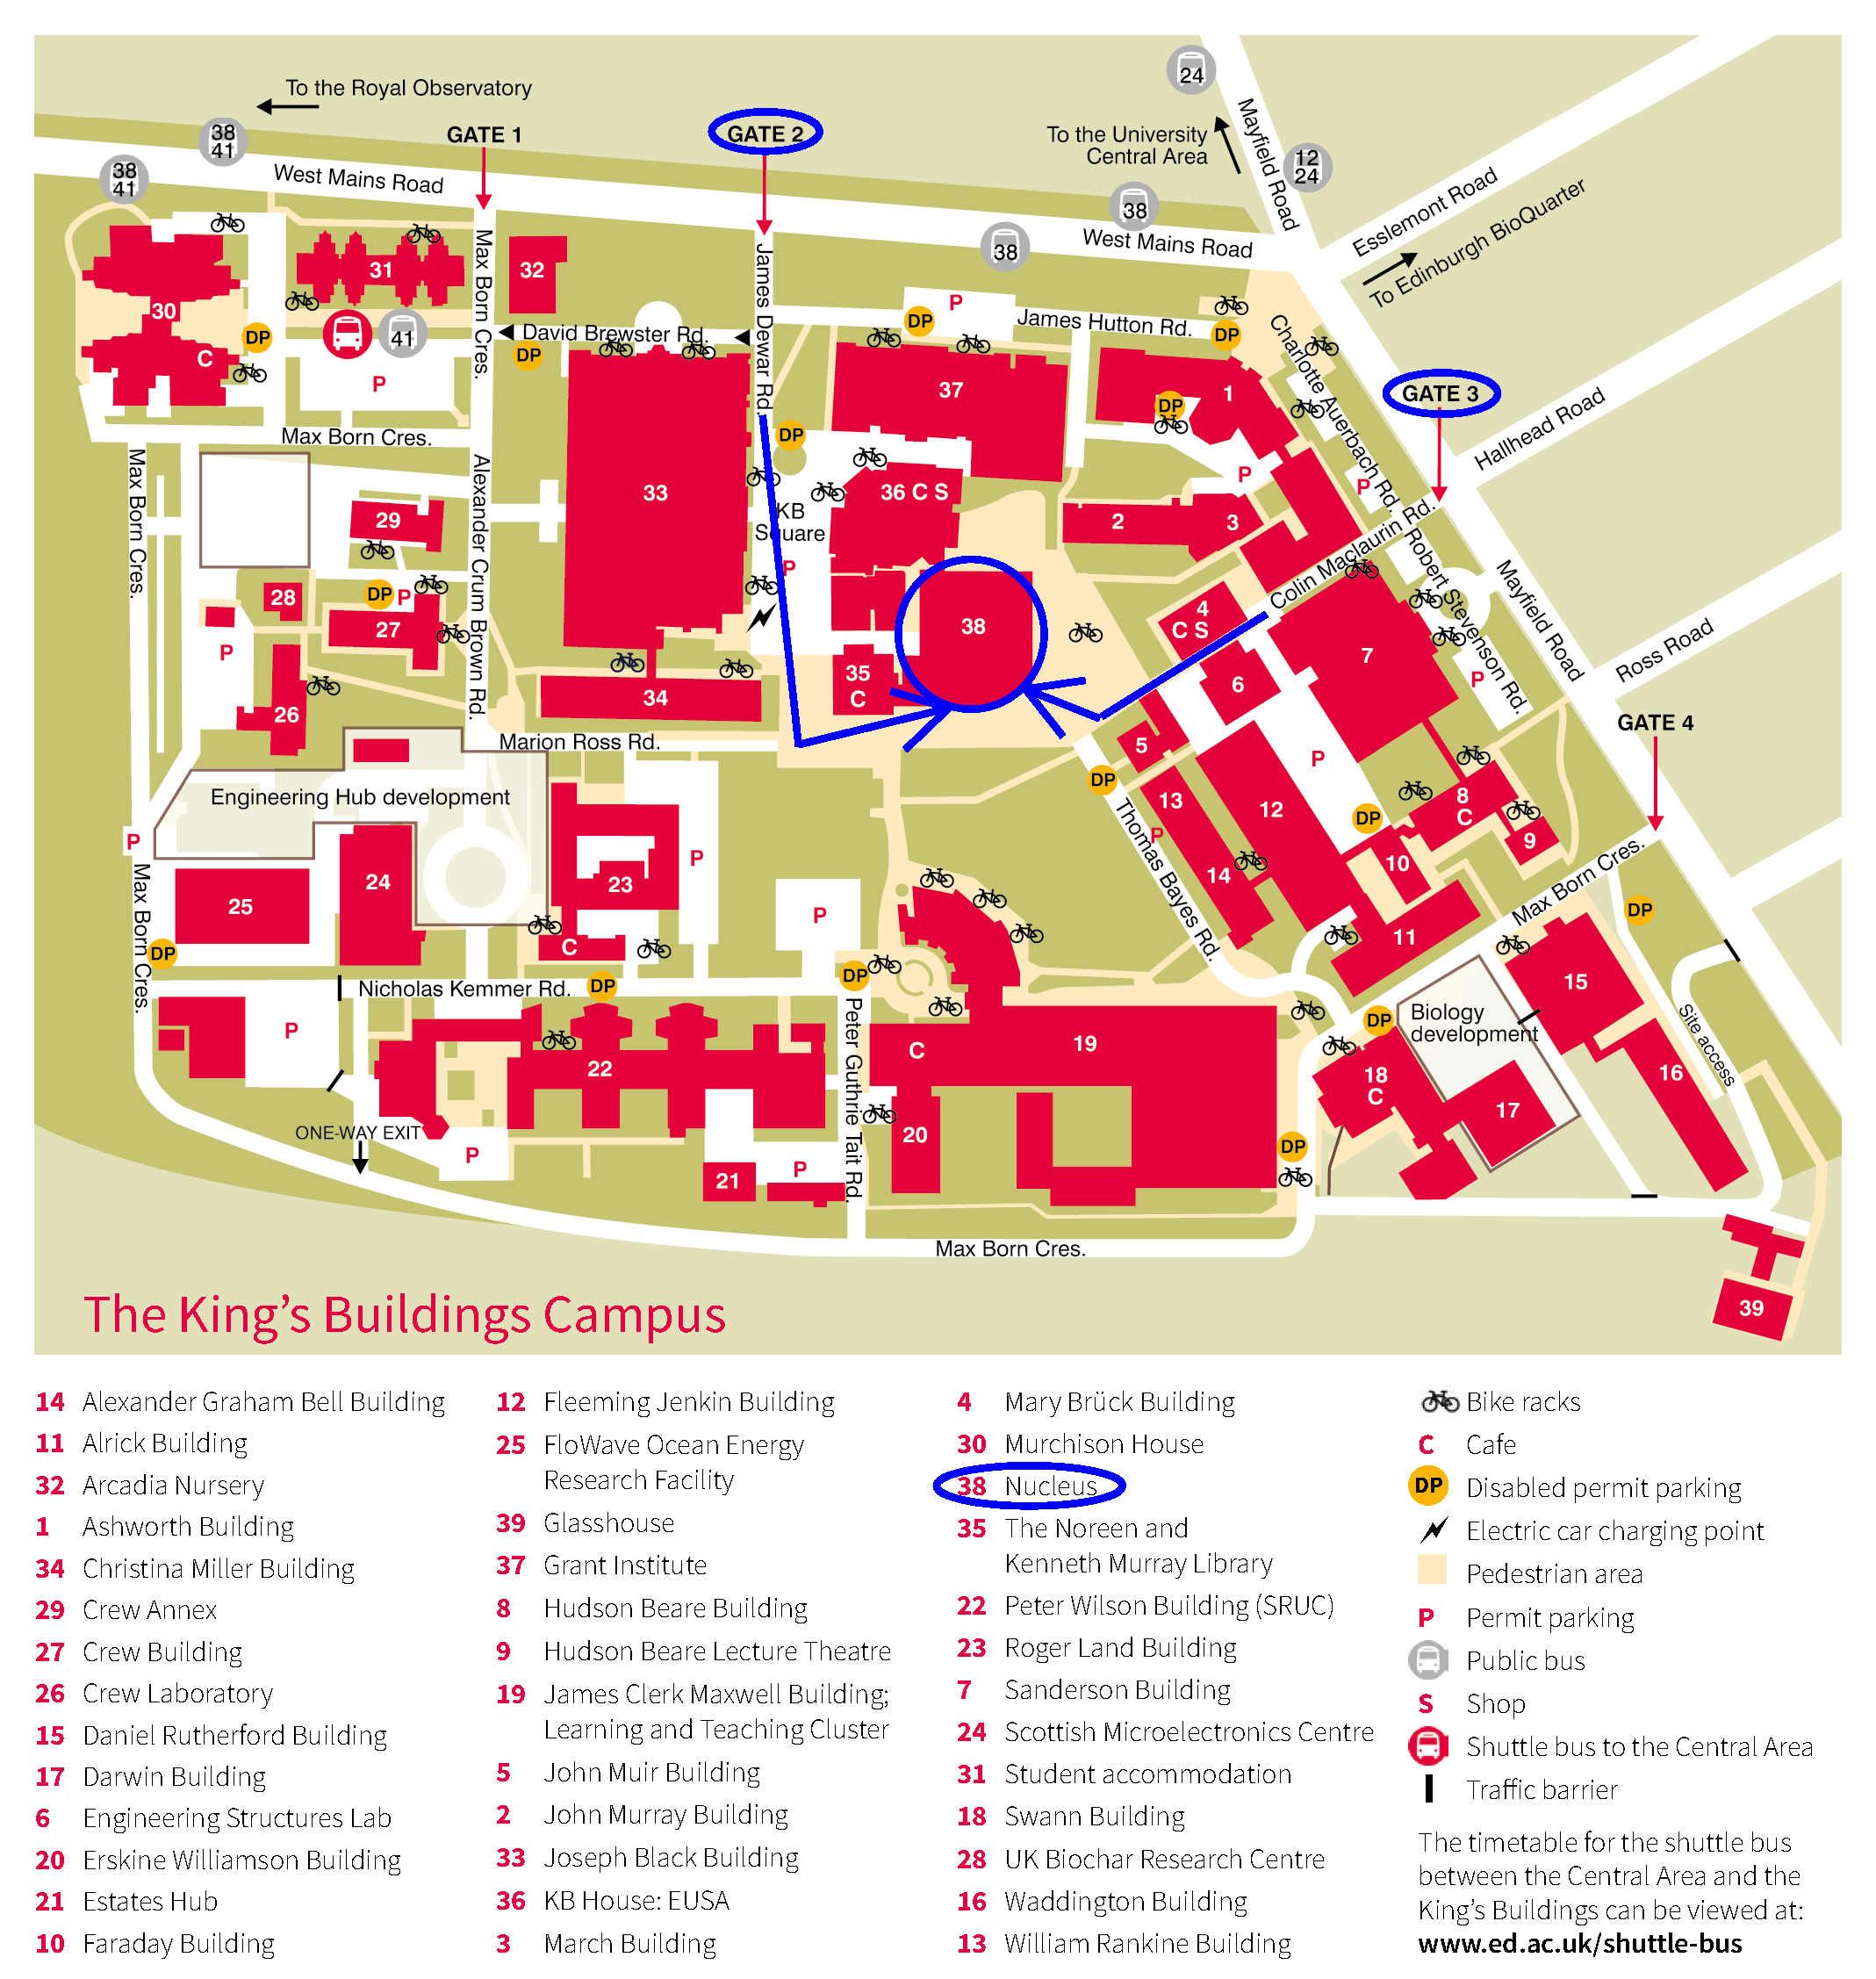 King's Buidlings Illustrative map with directions to the Nuclues building